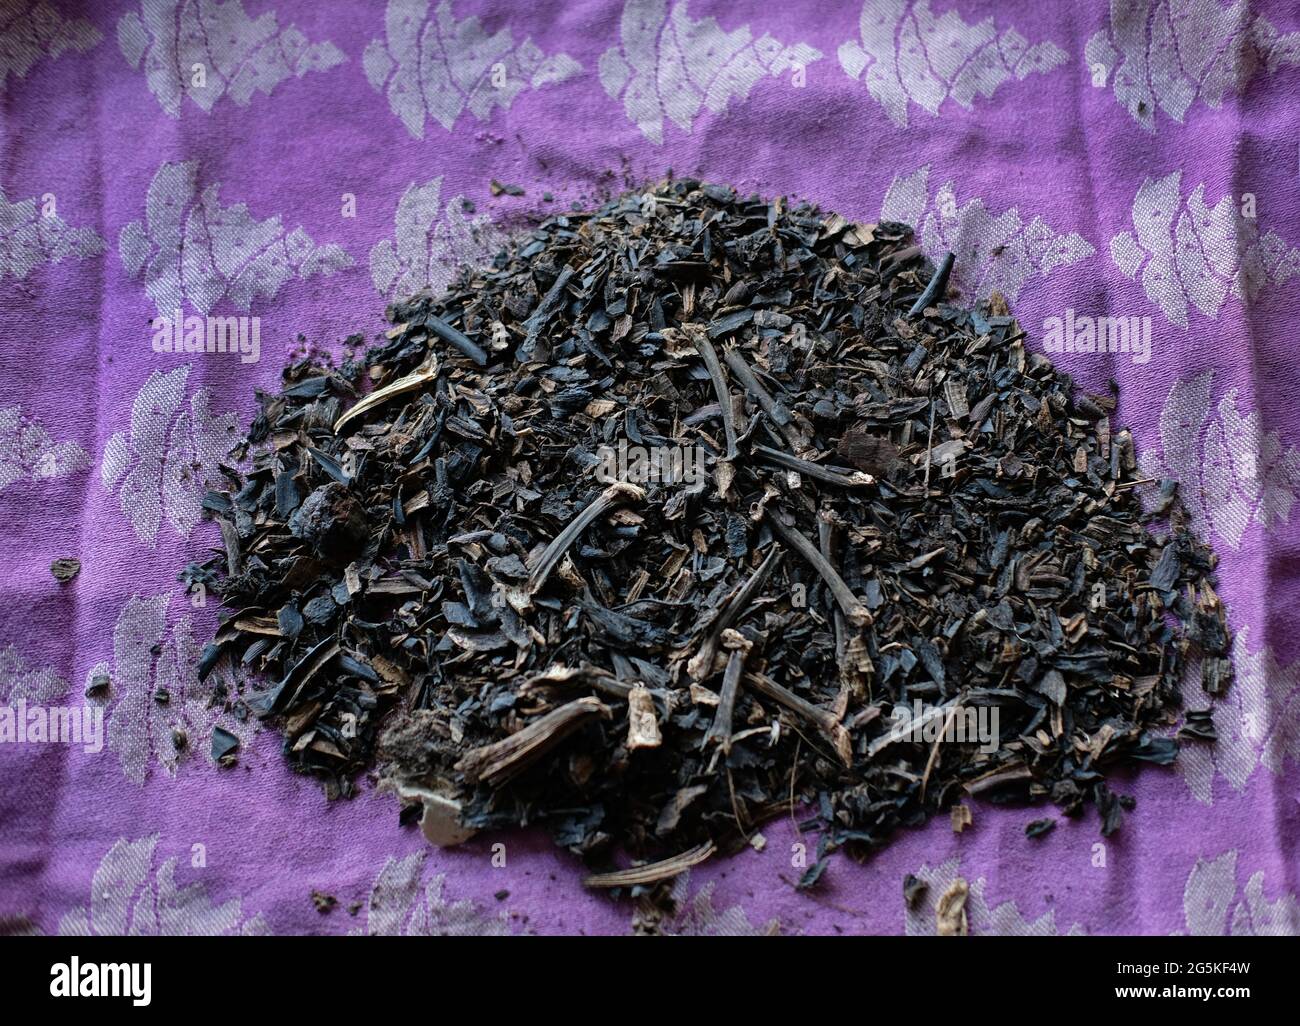 Dried bananas to be used for compost. Stock Photo